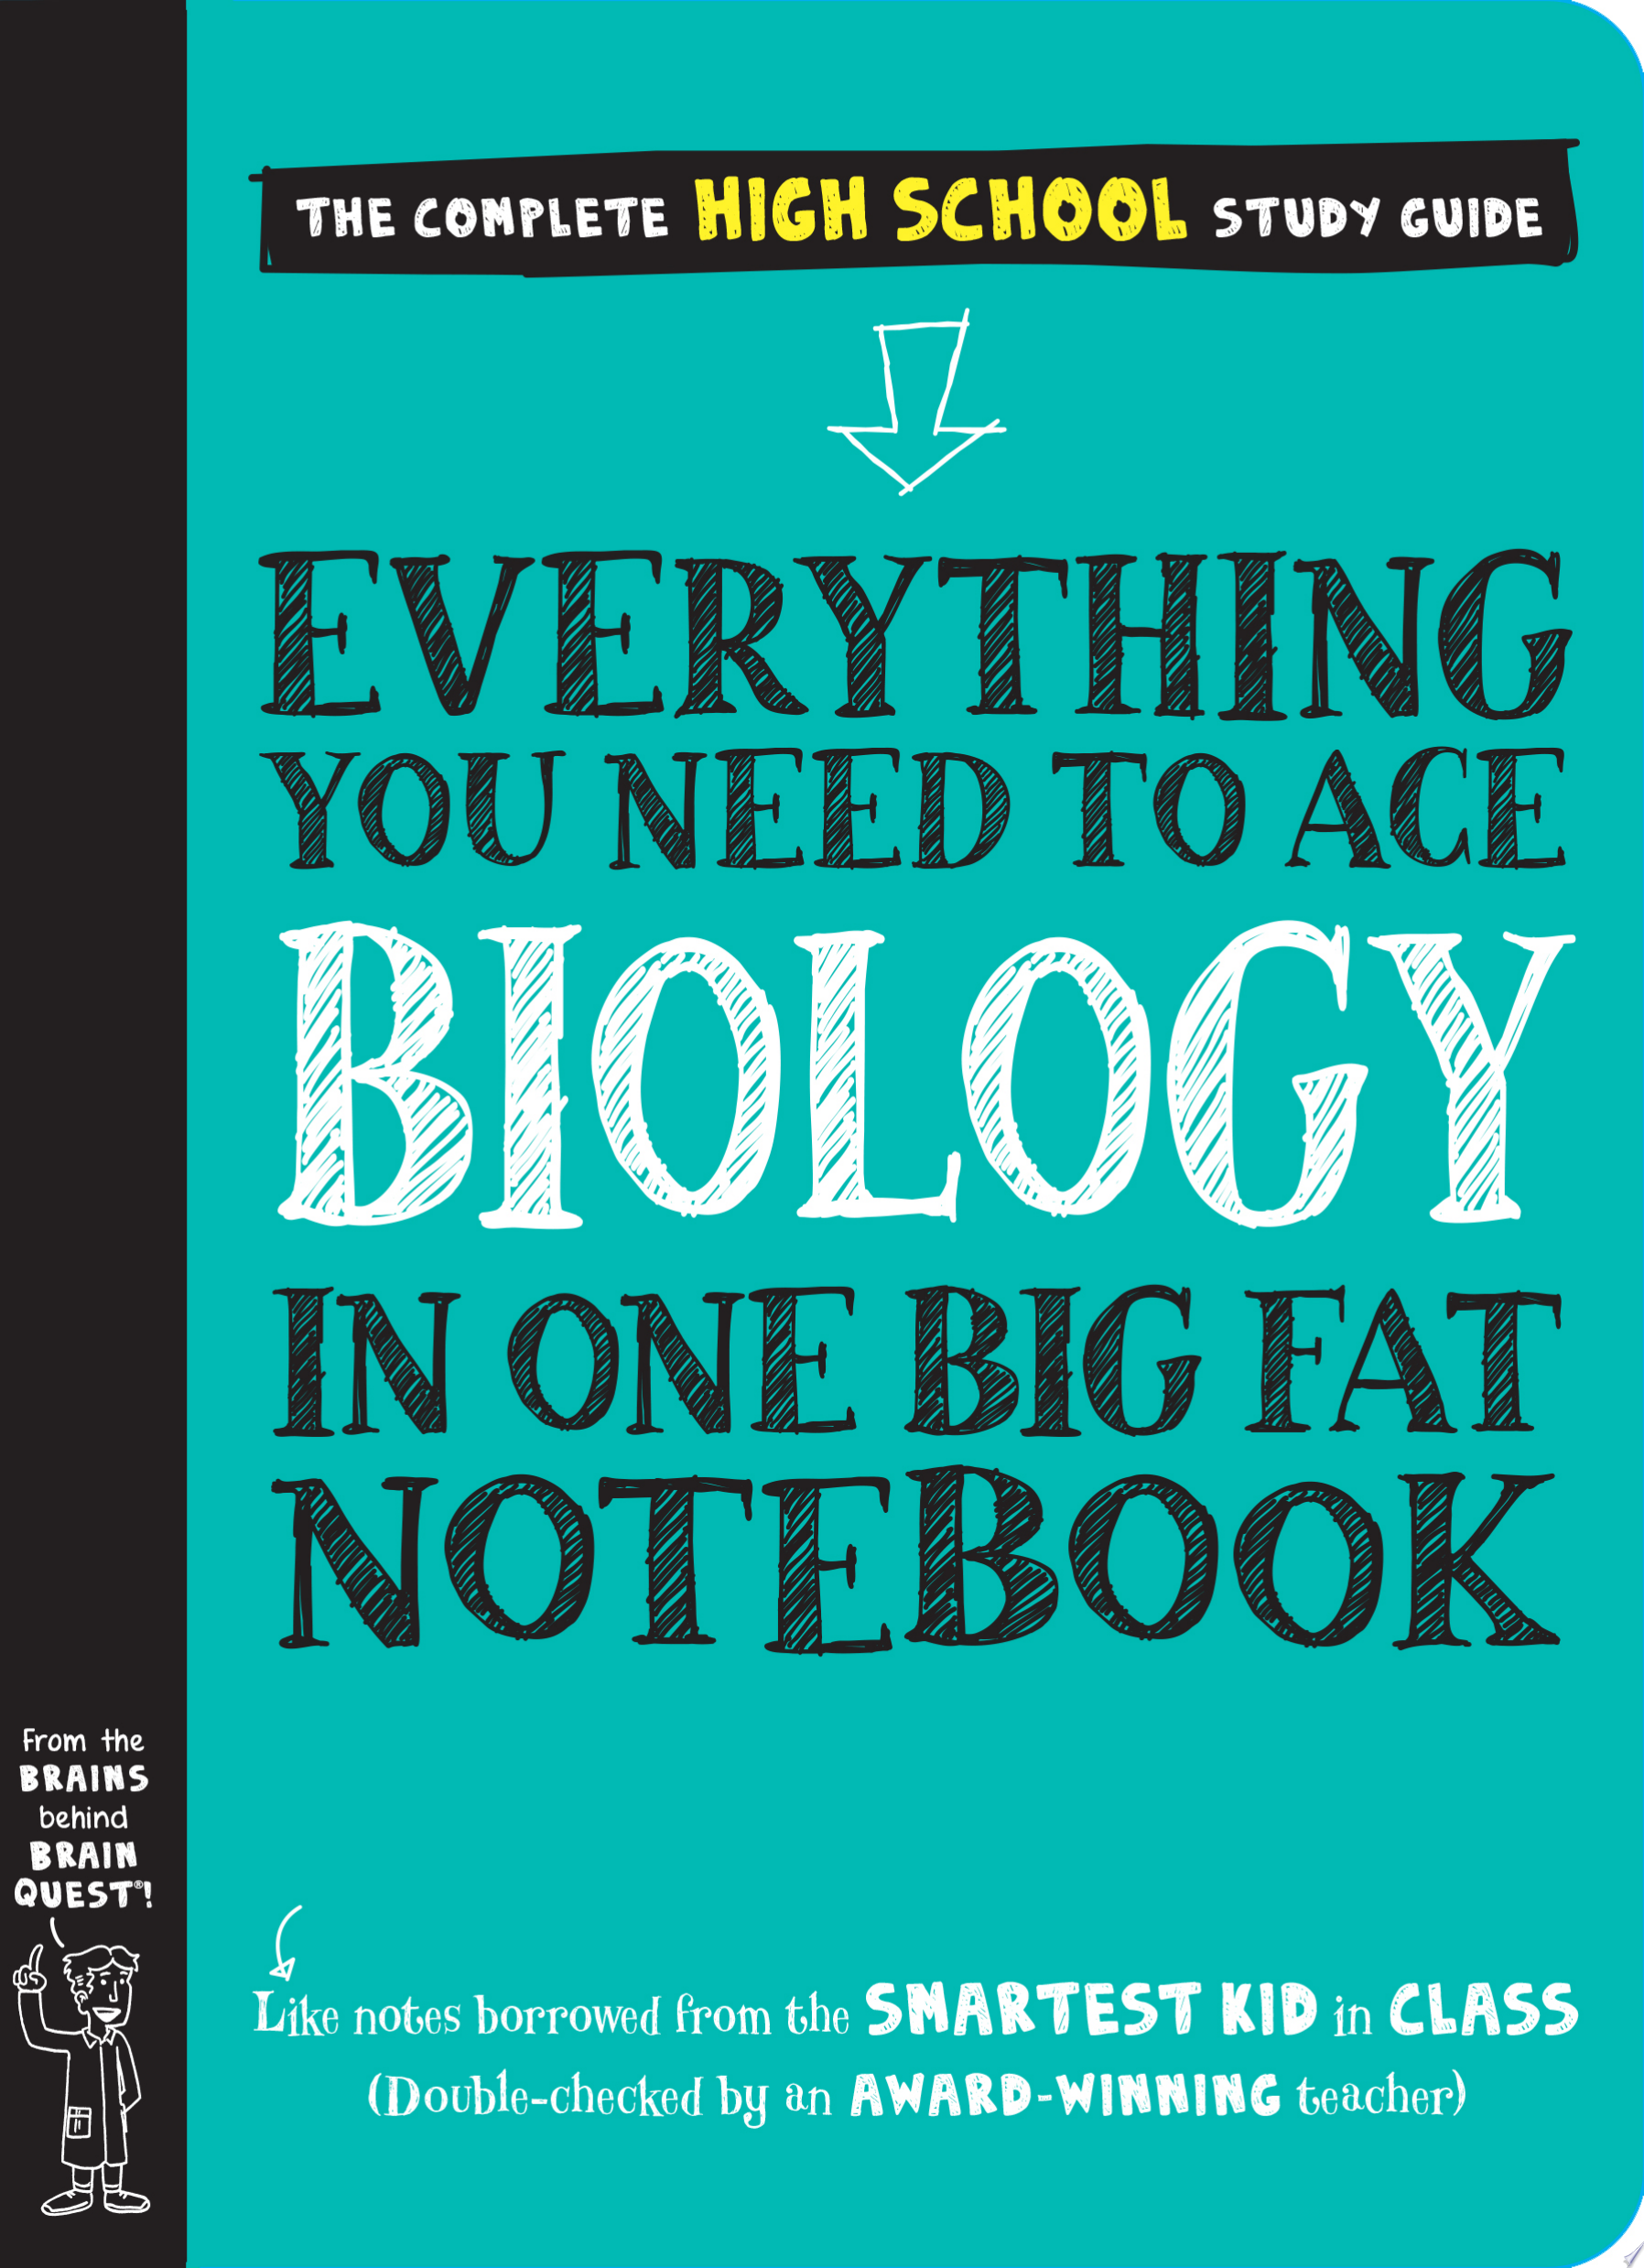 Image for "Everything You Need to Ace Biology in One Big Fat Notebook"